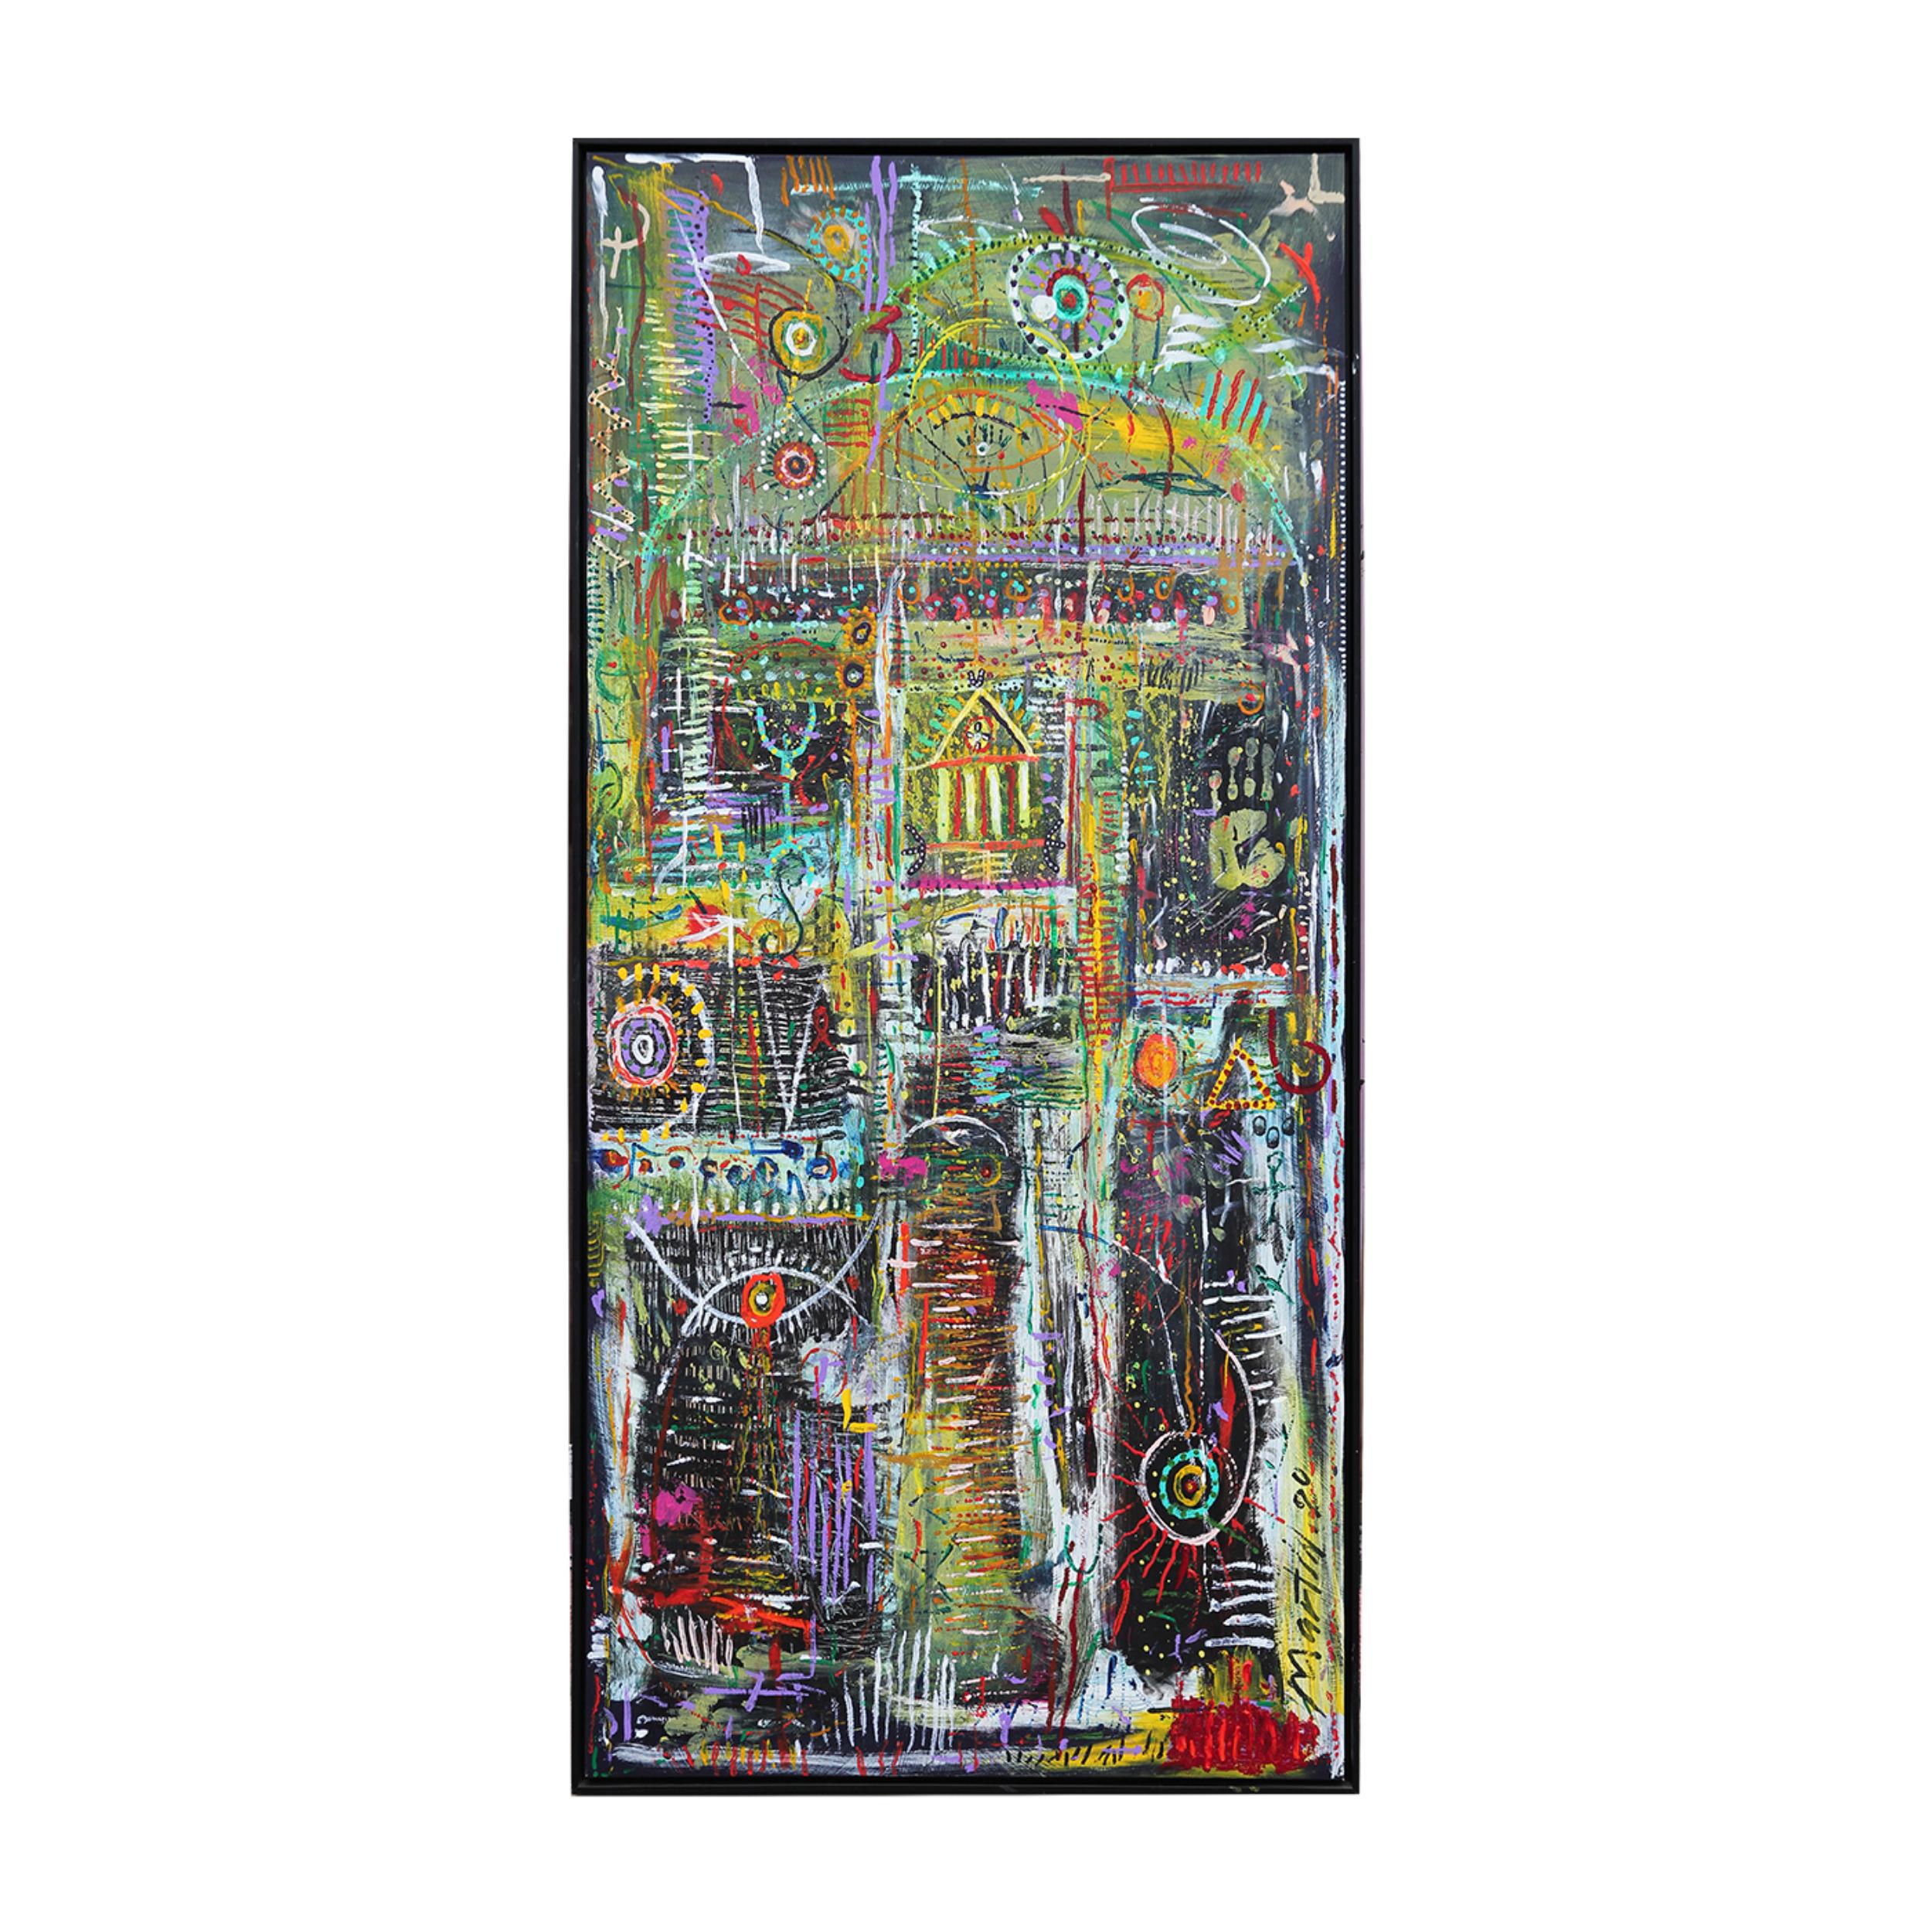 Longitudinal green, black, yellow, and red-toned abstract mixed media painting by Houston, TX artist, Larry Martin. This painting depicts various lines, patterns, and objects such as a house and eye-like shapes. Signed by the artist at the bottom